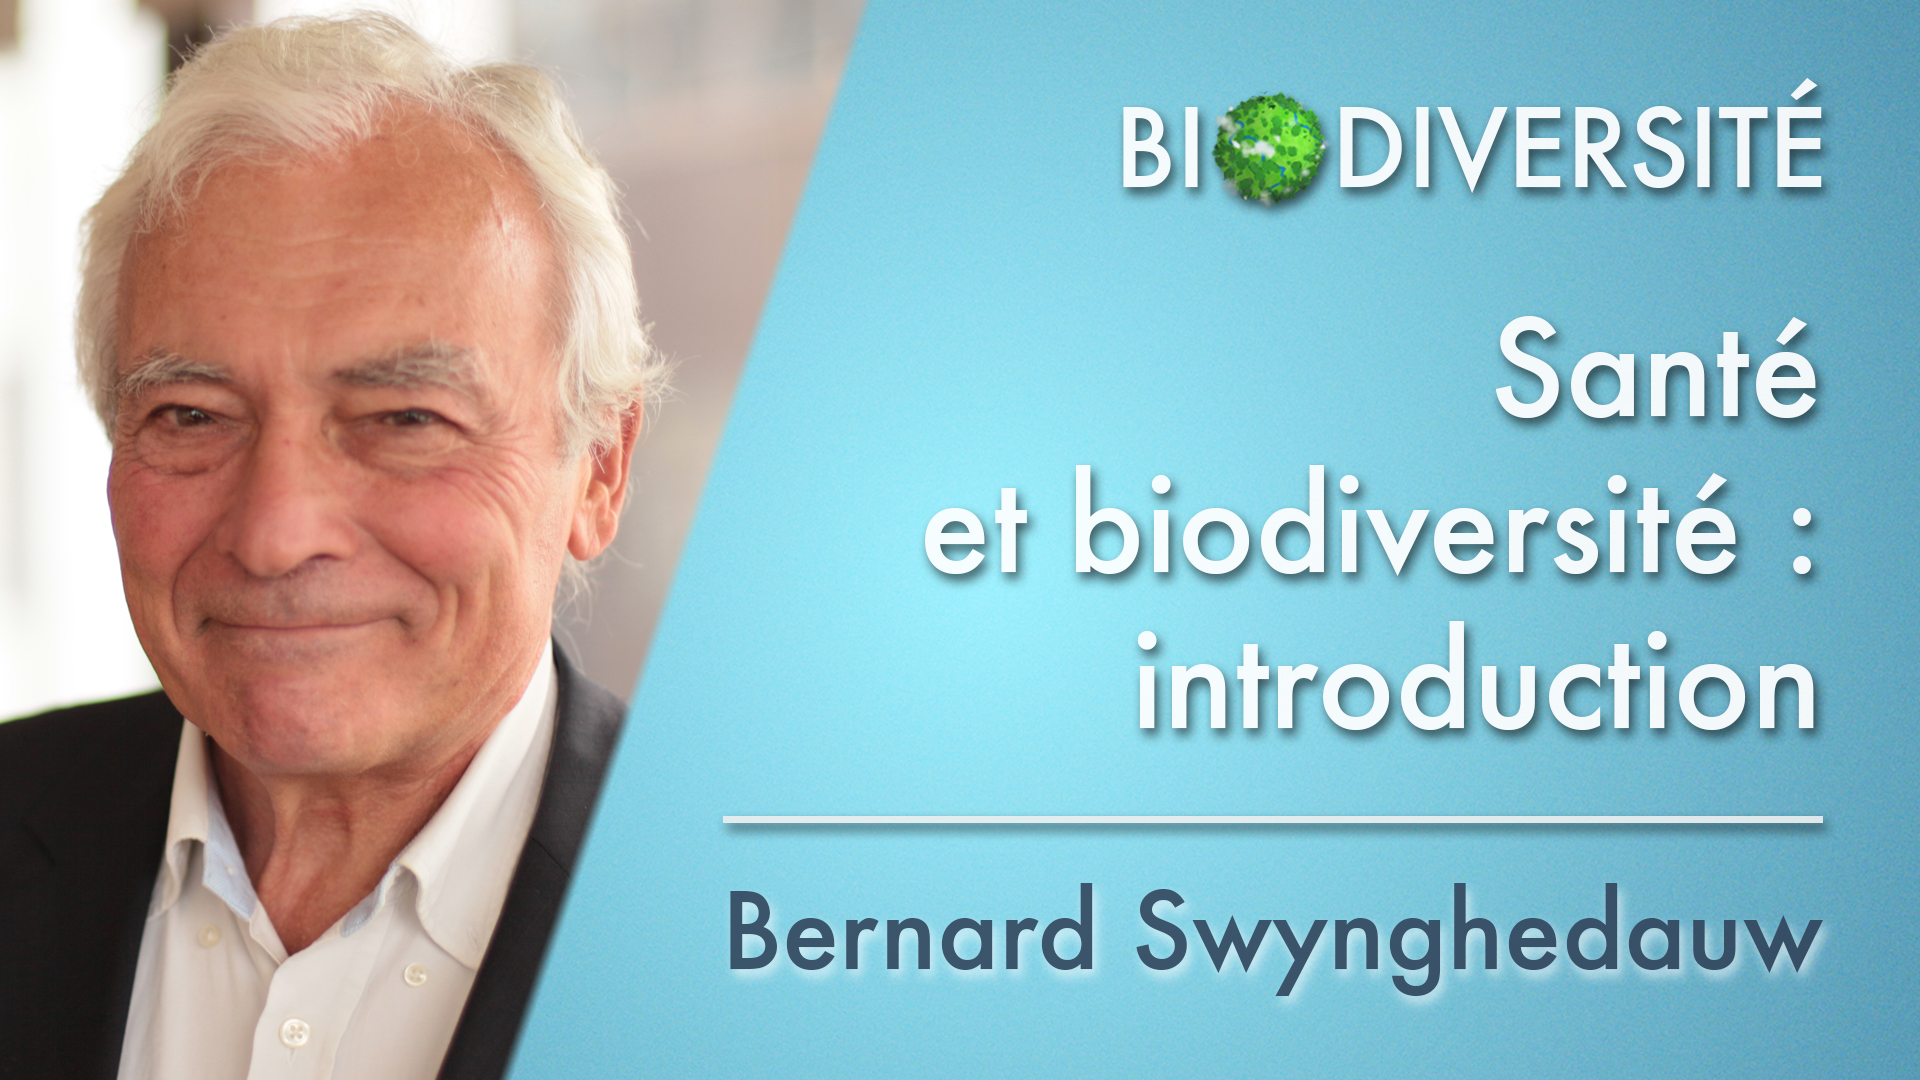 EN-1. Health and biodiversity: what links